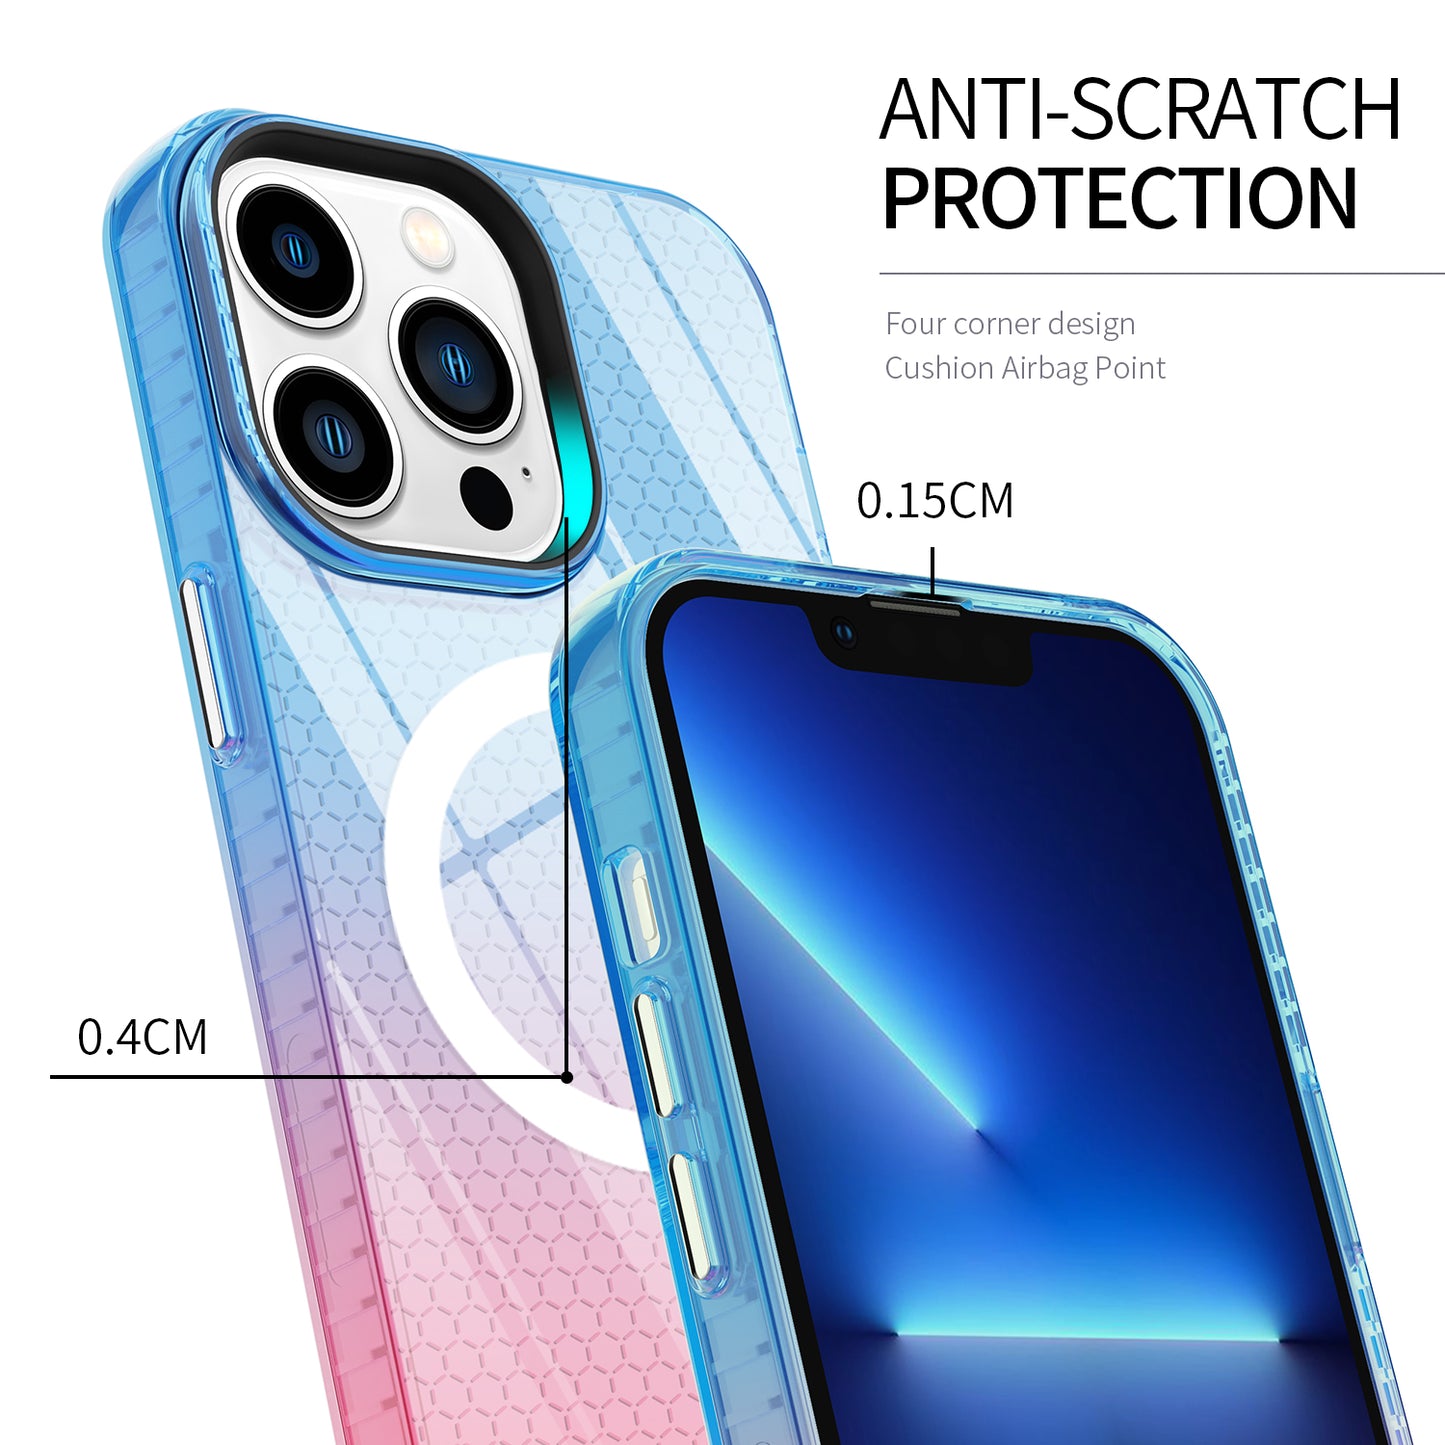 wireless charging clear back cover shockproof magnetic honeycomb pattern phone case for iphone 11